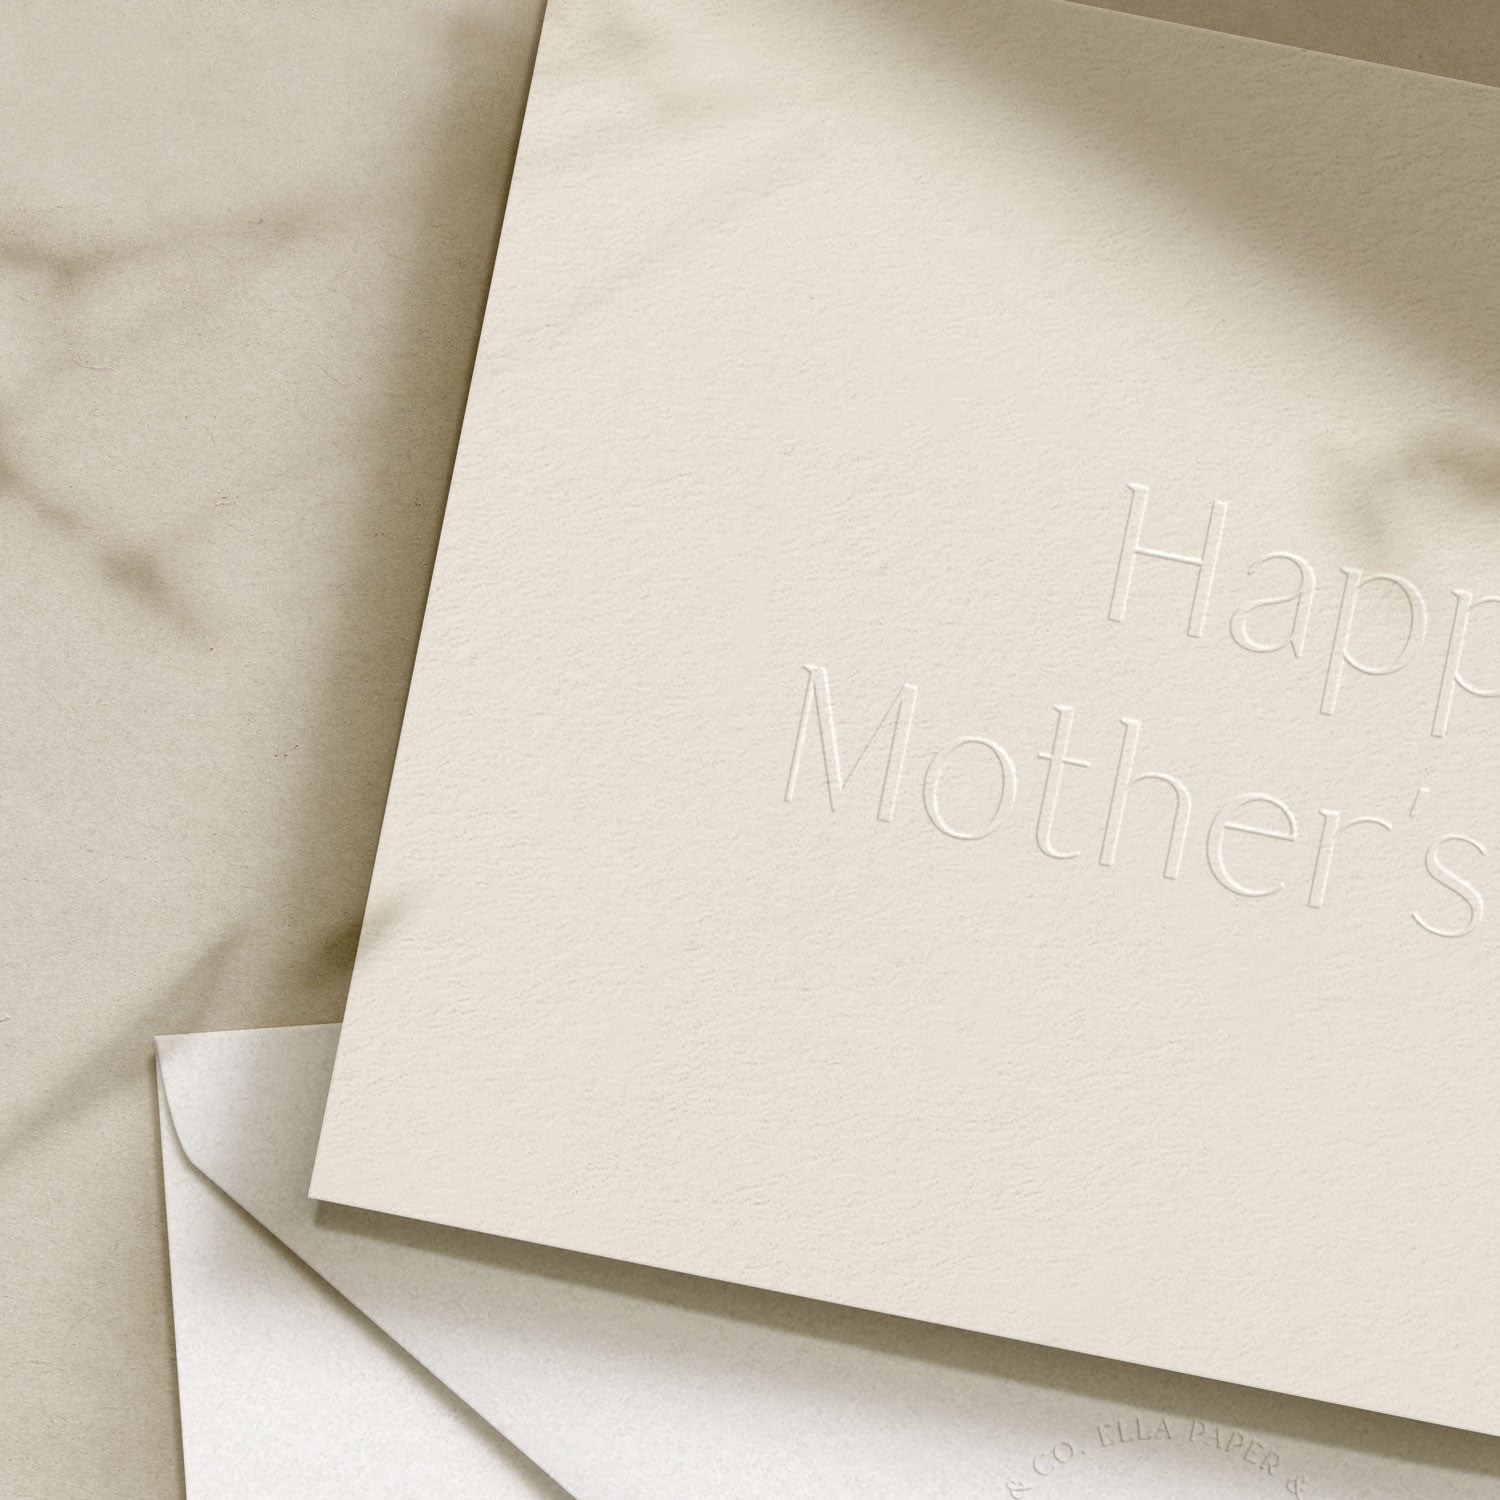 Mother's Day Card No. 06